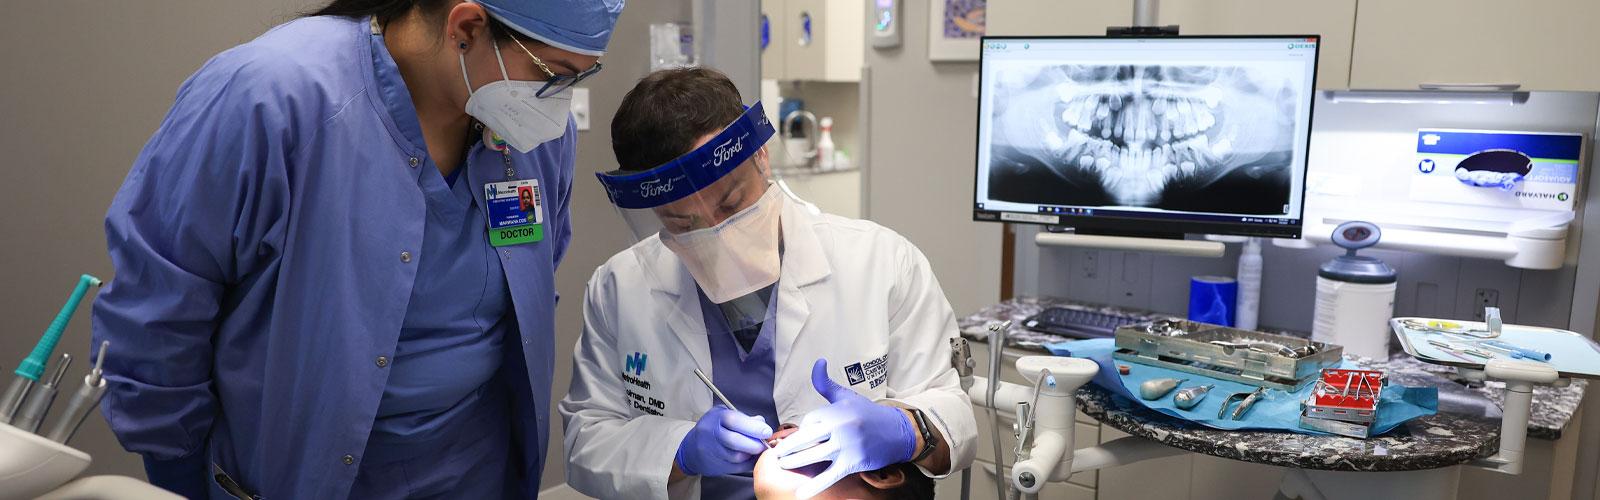 Two Case Western Reserve University dental students work on a patient in the clinic